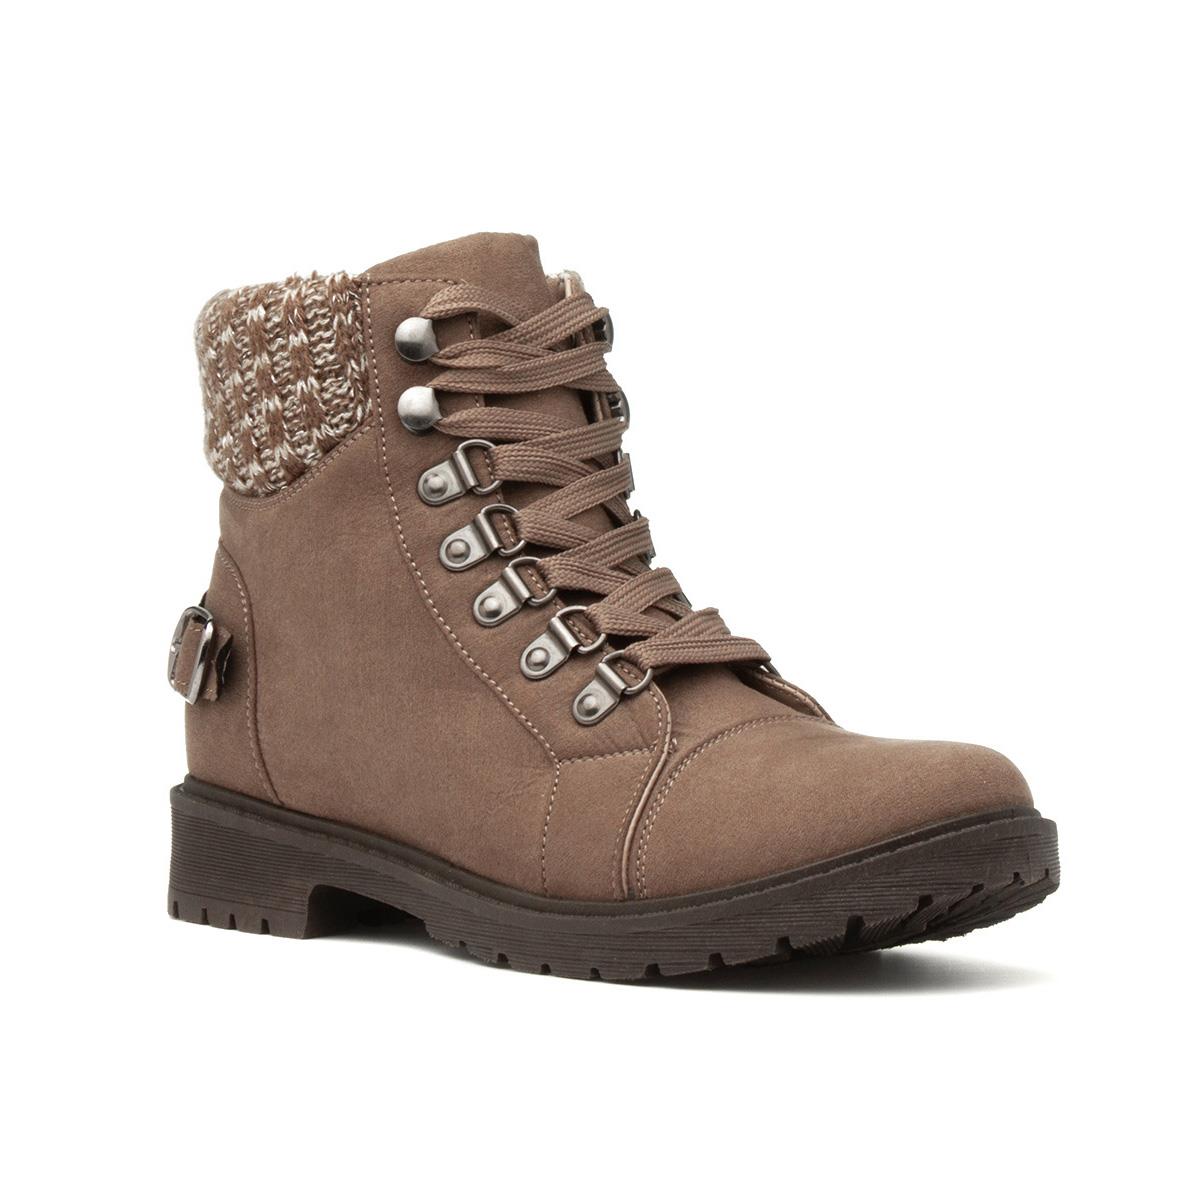 Lilley Womens Taupe Lace Up Ankle Boot-18057 | Shoe Zone